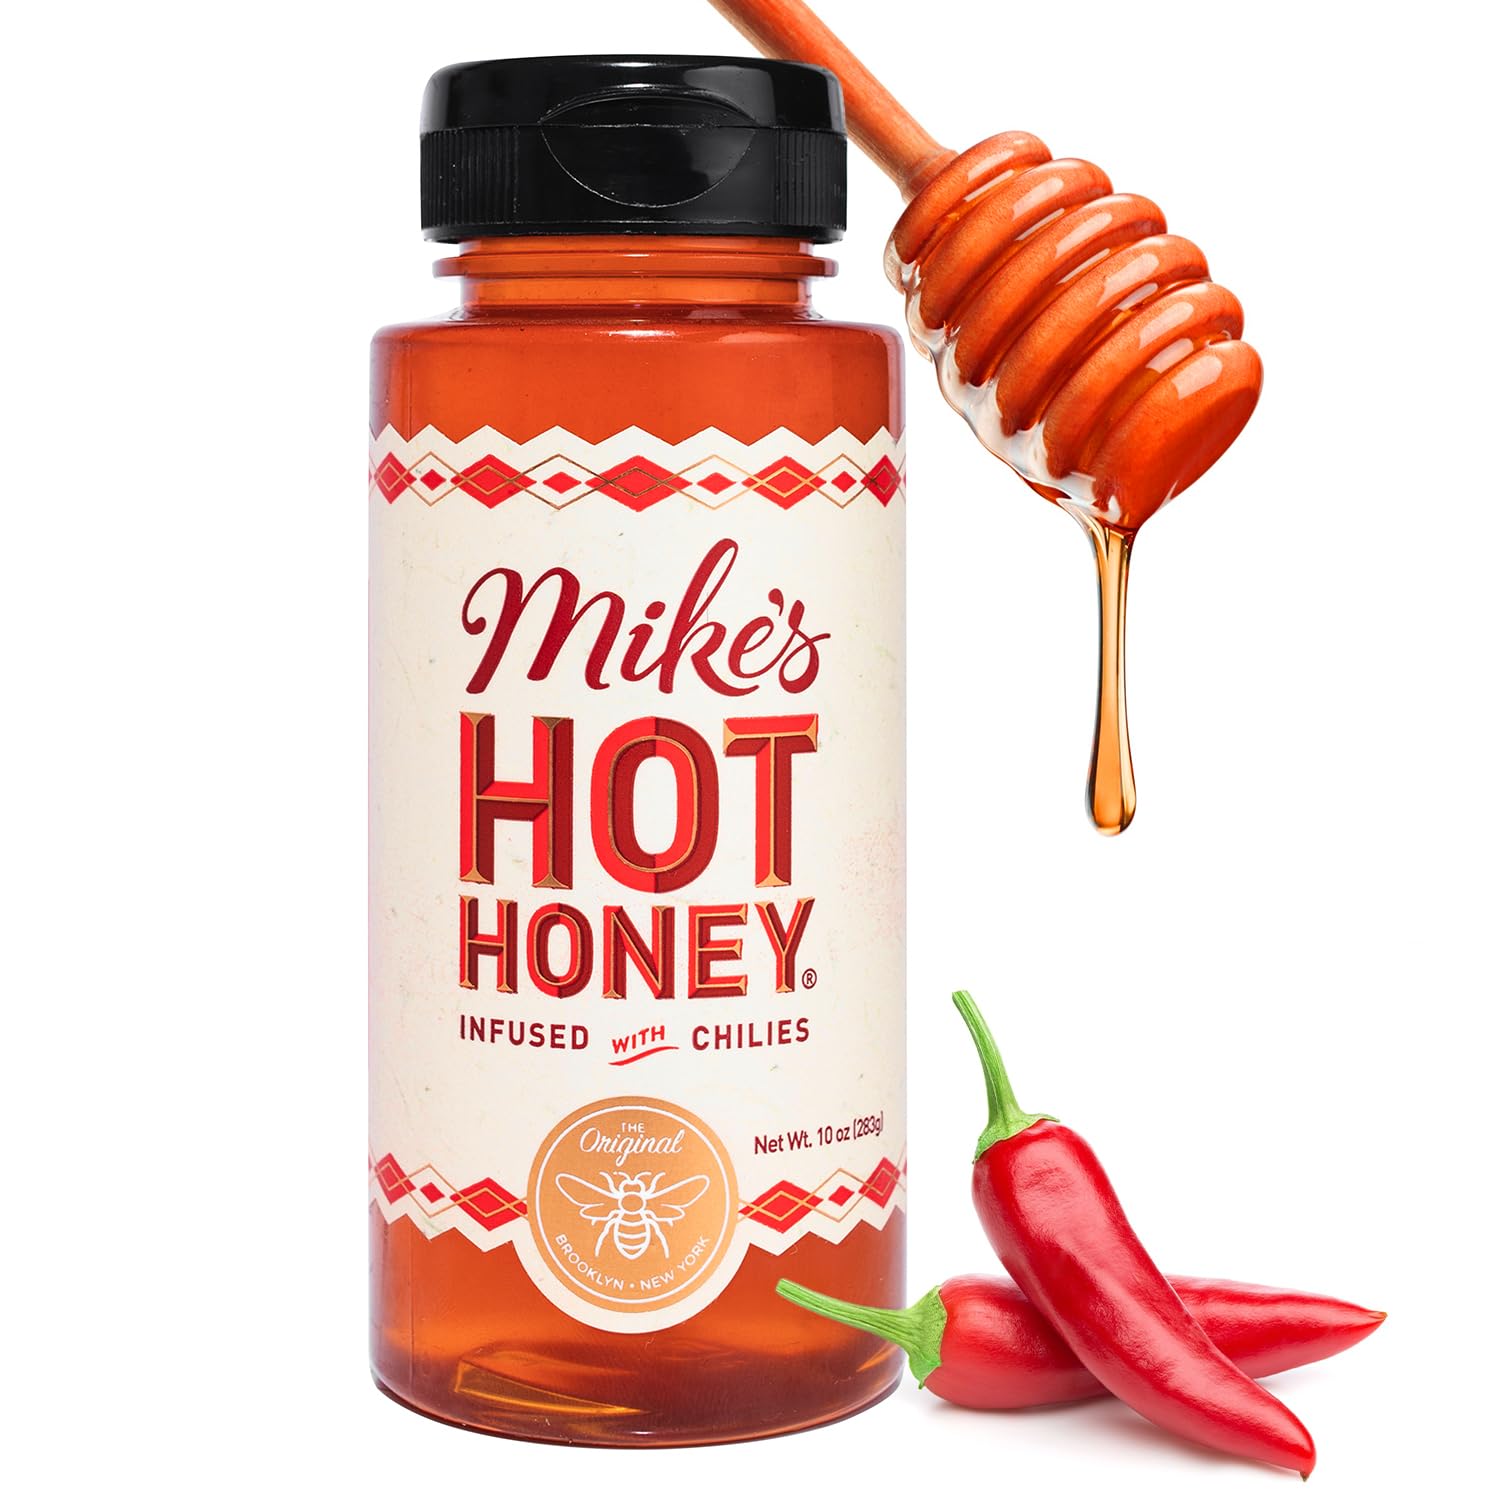 10-Oz Mikes Hot Honey Infused with Chili Peppers $6.23 w/ S&S + Free Shipping w/ Prime or on $35+